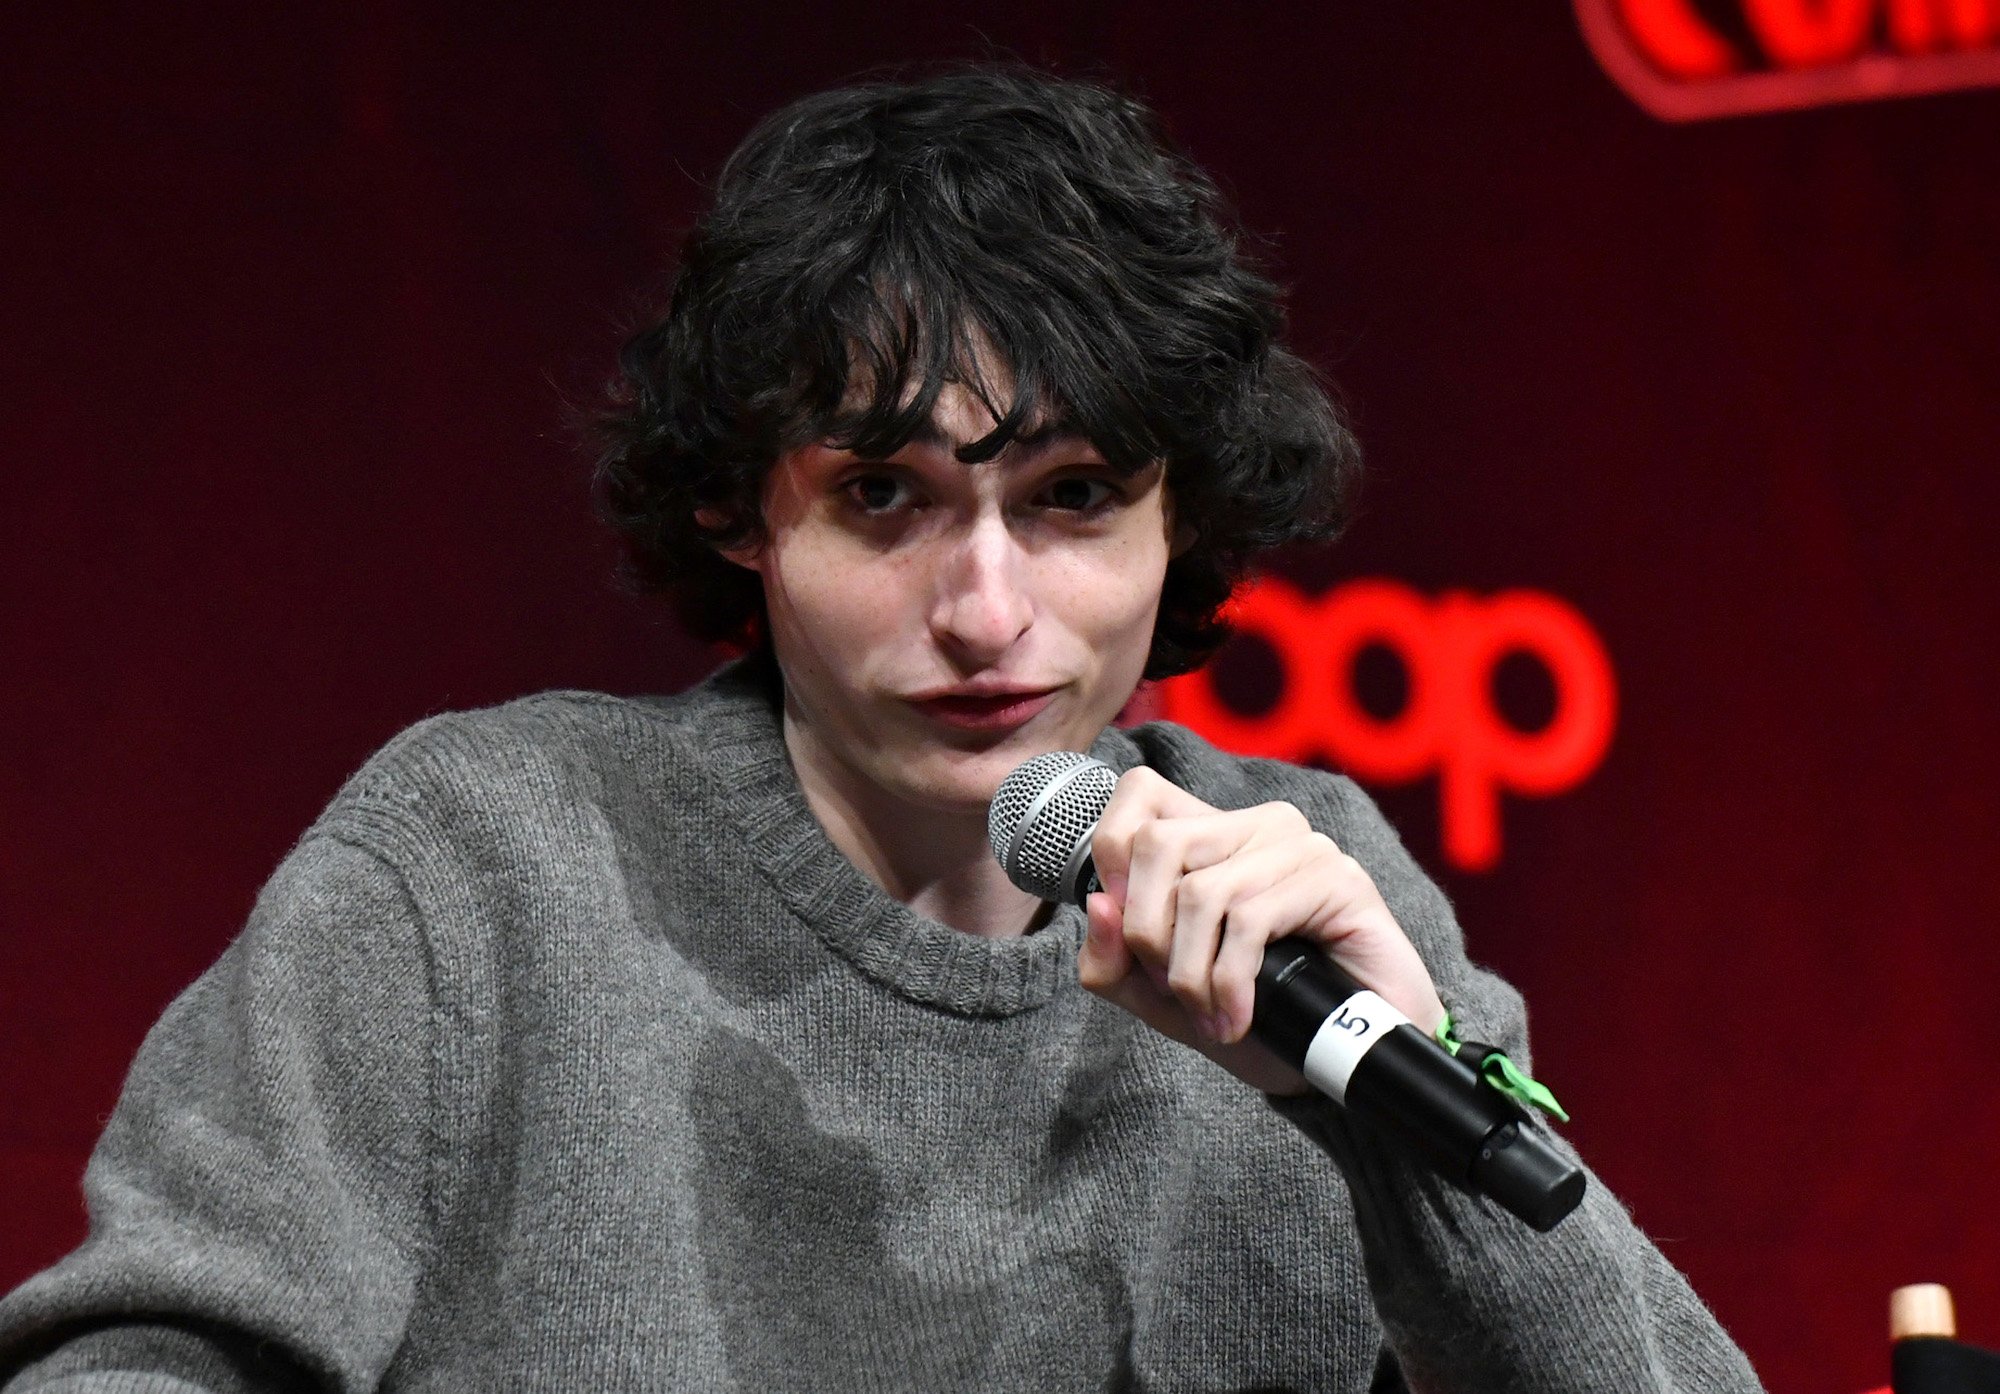 Finn Wolfhard, who stars in 'Stranger Things' Season 4, in a gray sweater at New York's Comic Con